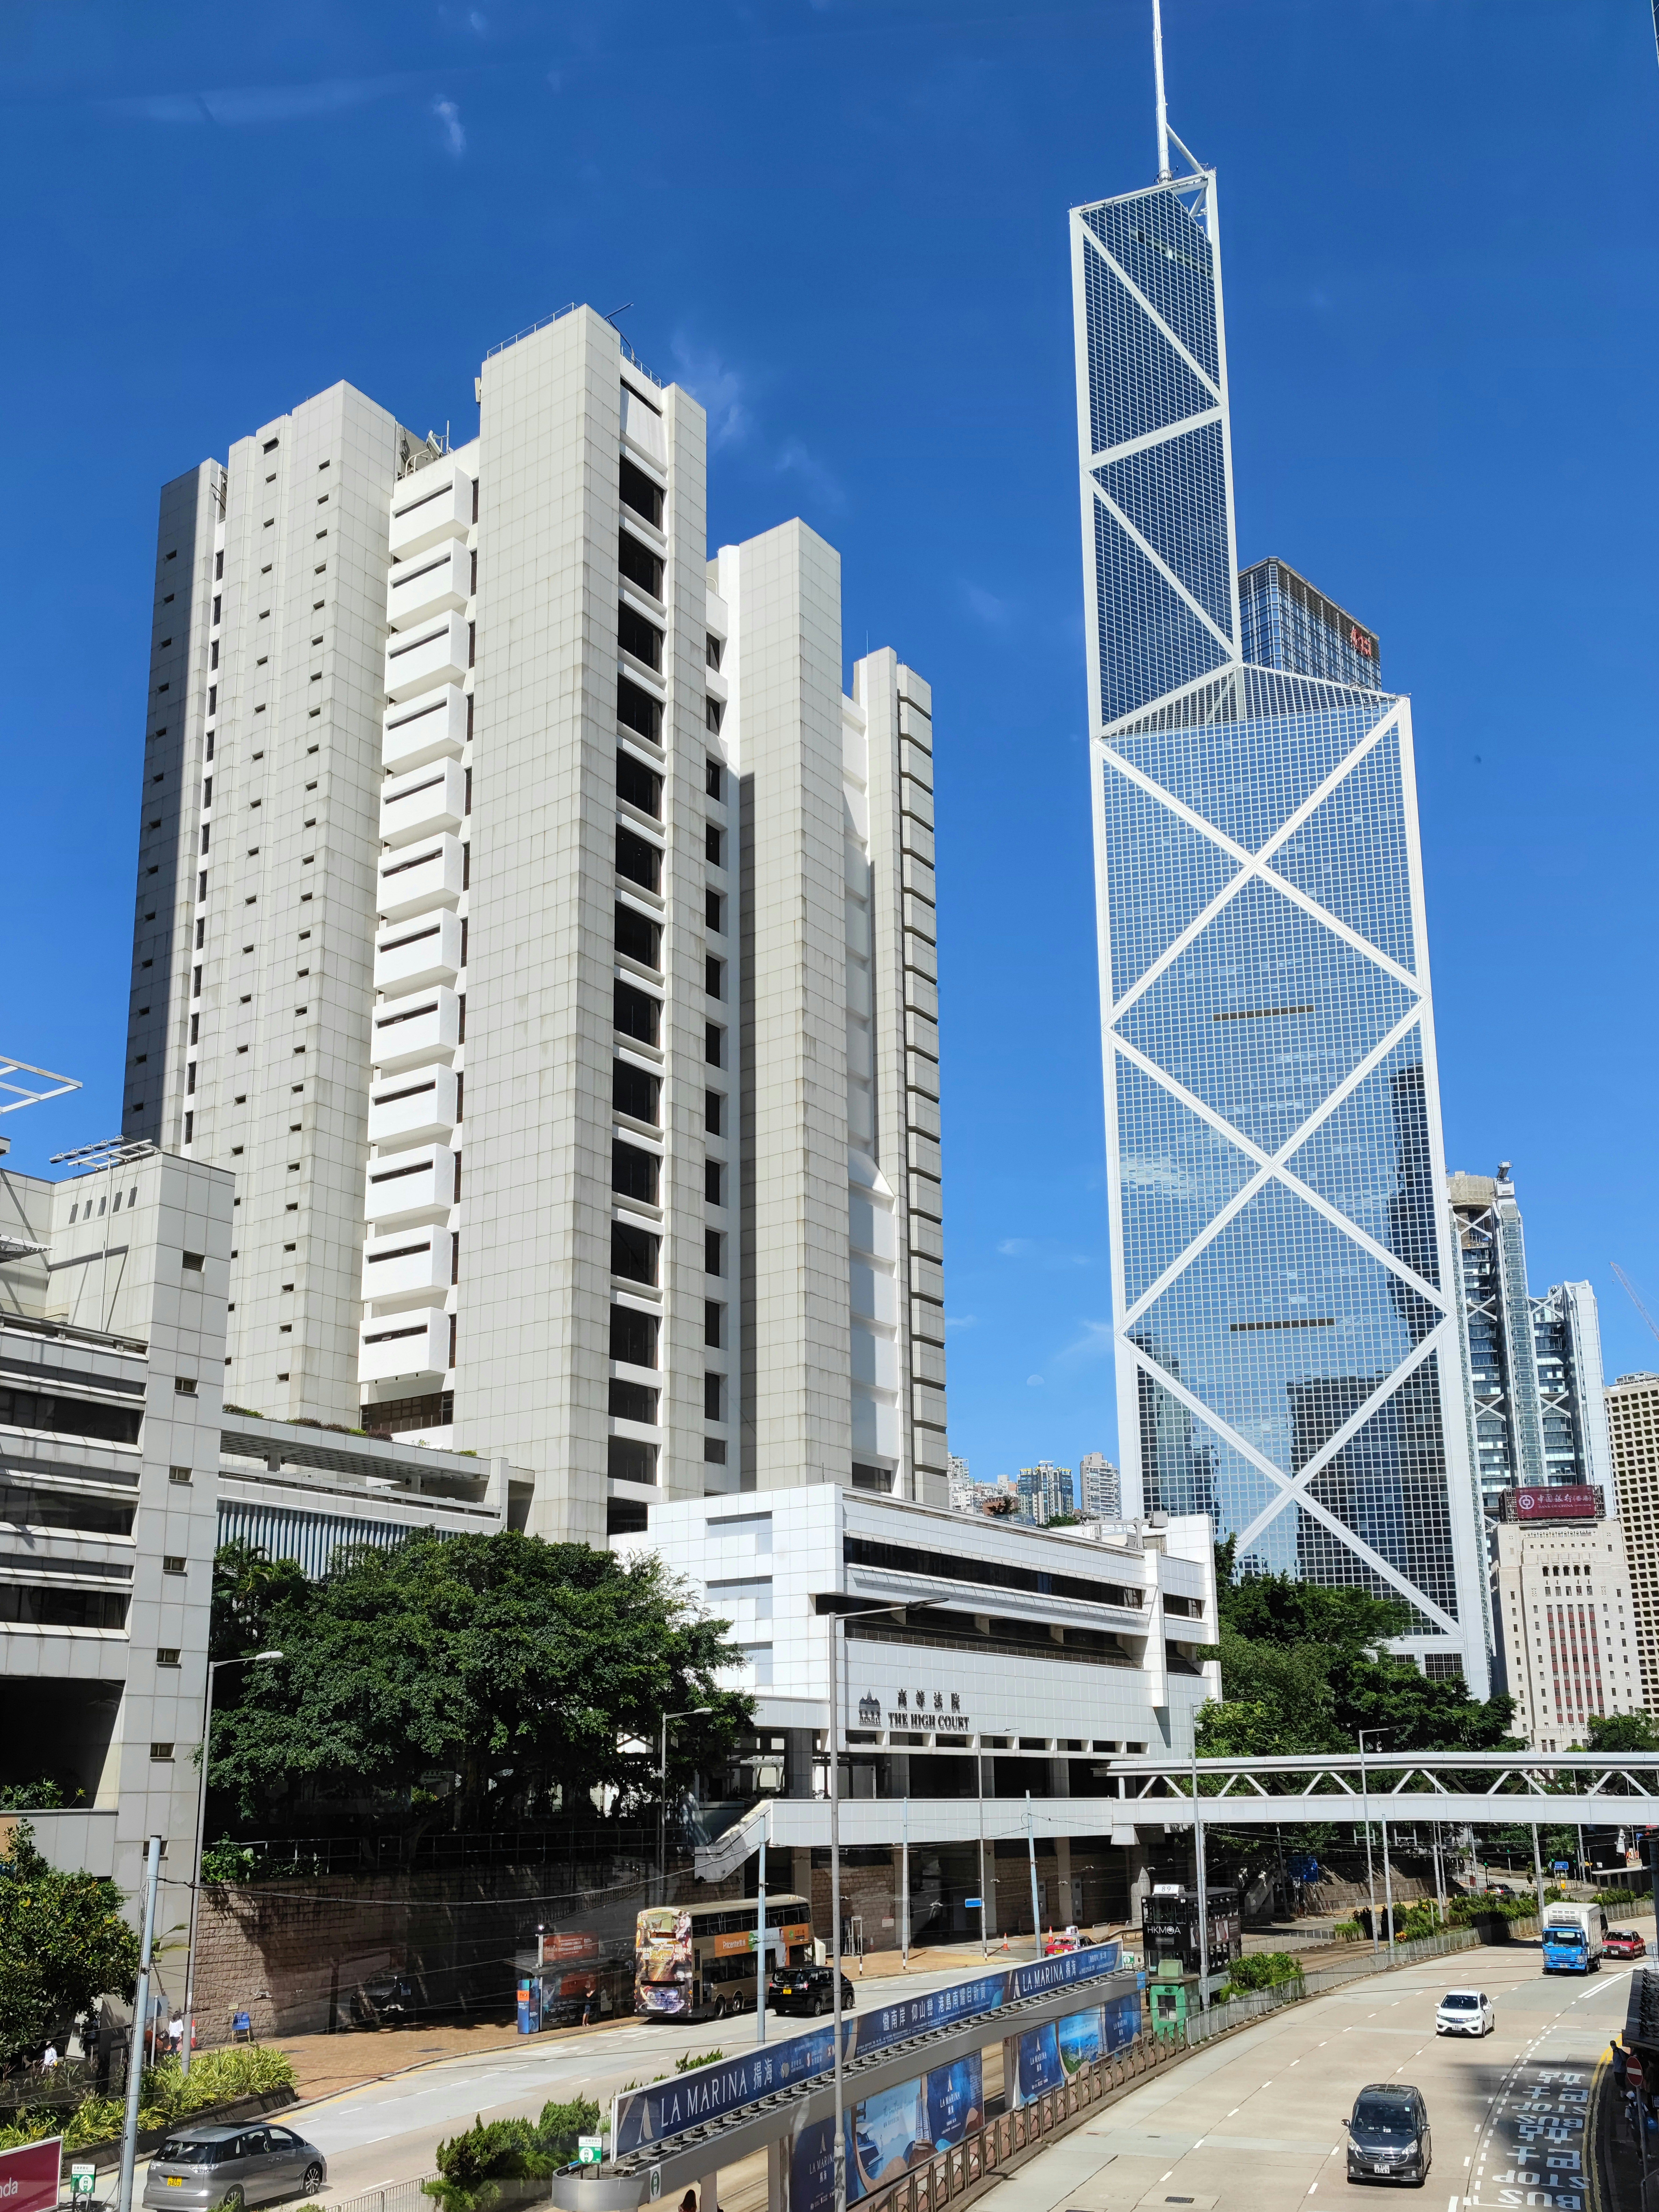 High Court in Queensway Road, Admiralty, with Bank of China in the background.